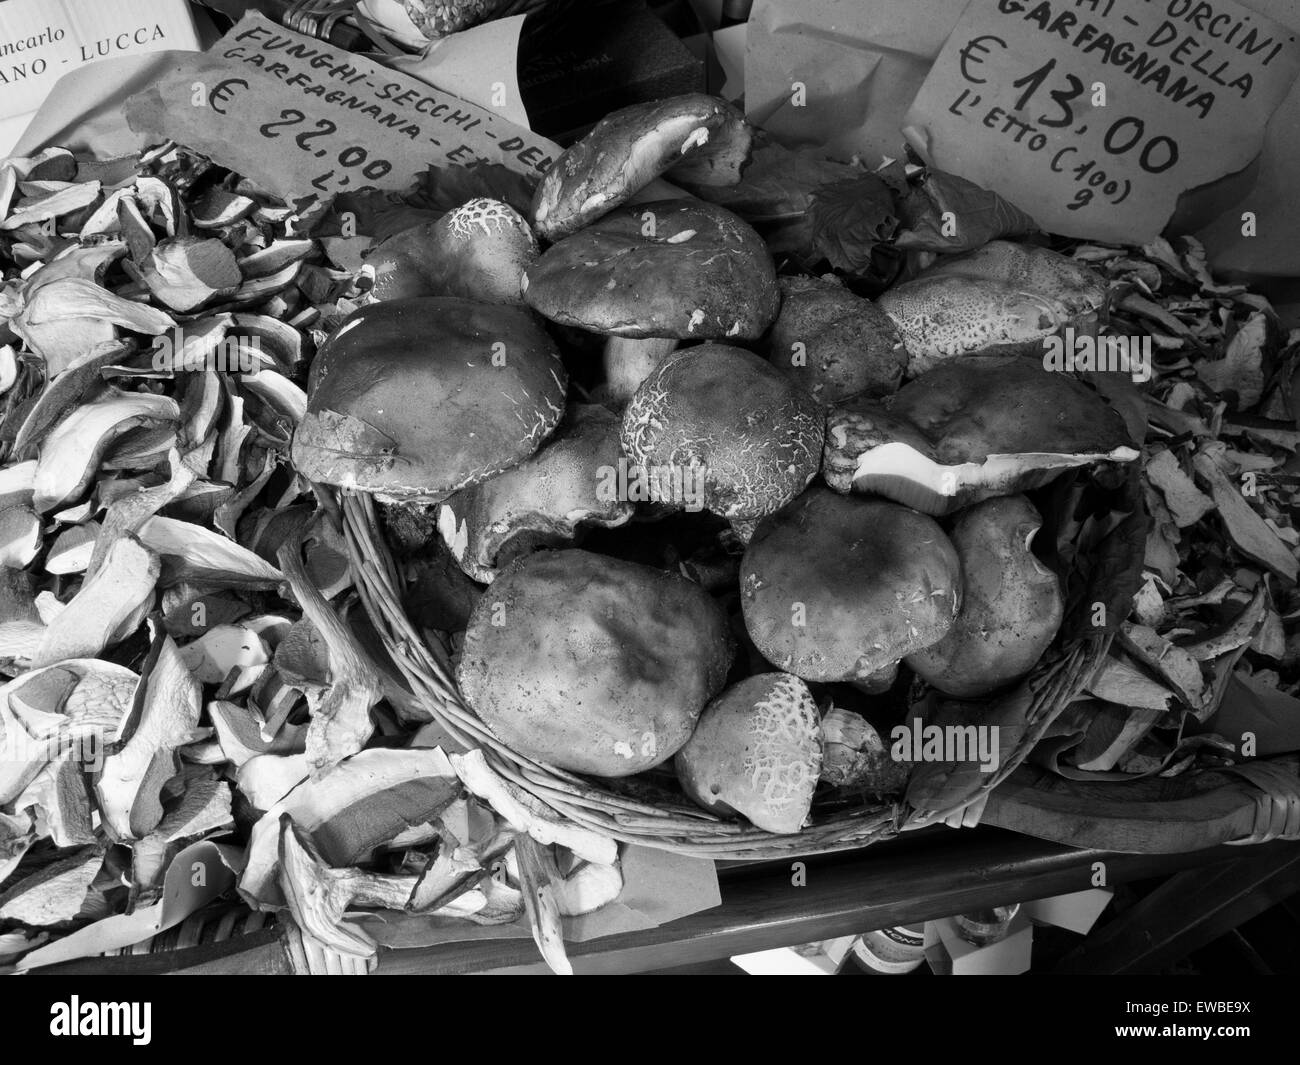 Funghi (Mushrooms) for sale outside shop in Italy Stock Photo